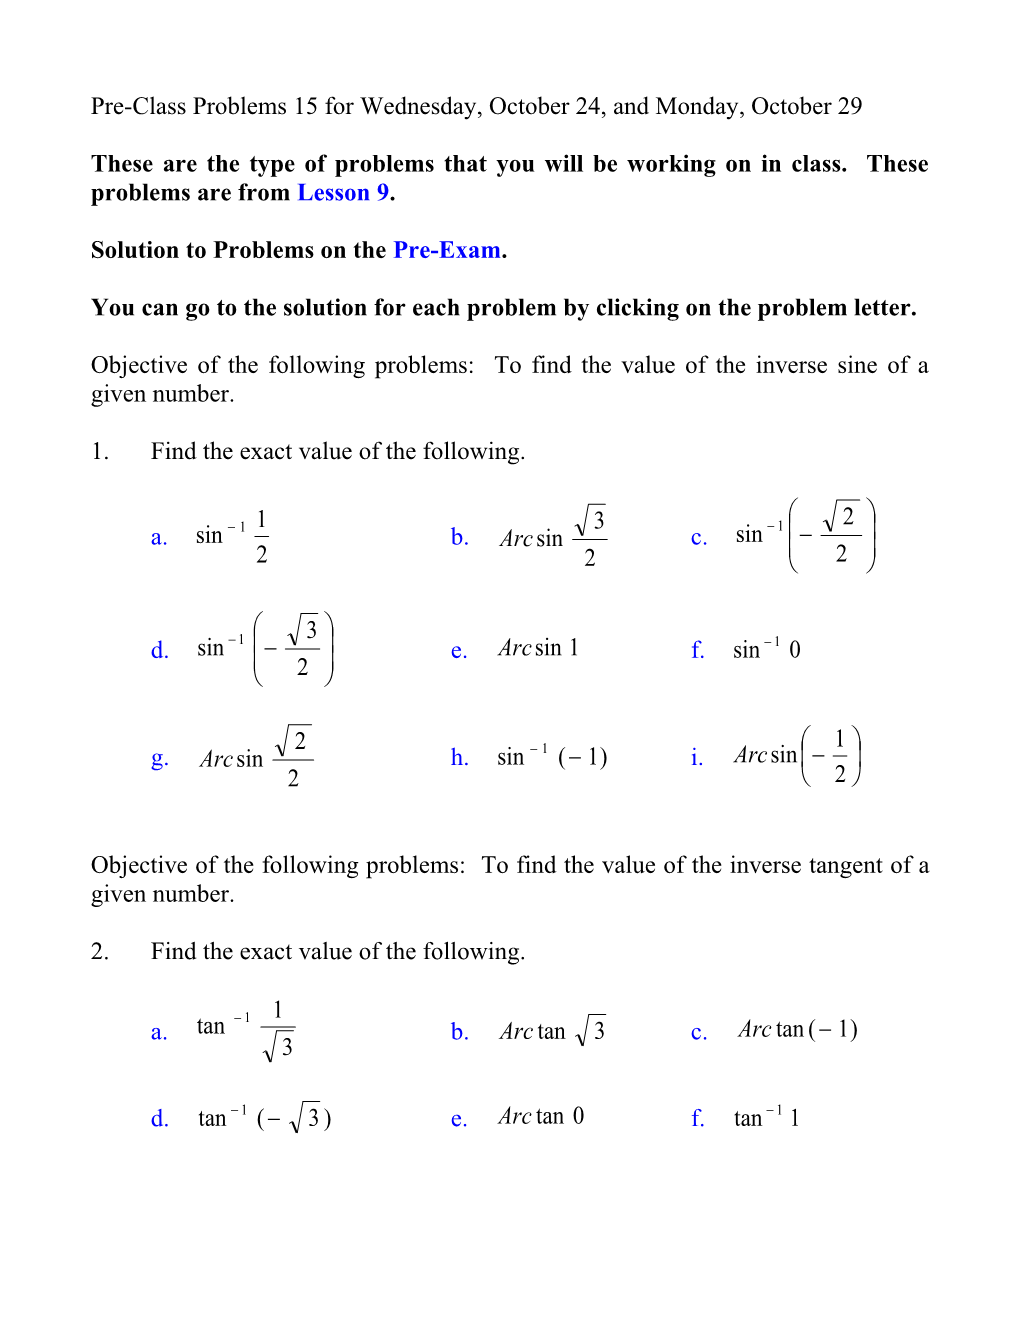 You Can Go to the Solution for Each Problem by Clicking on the Problem Letter